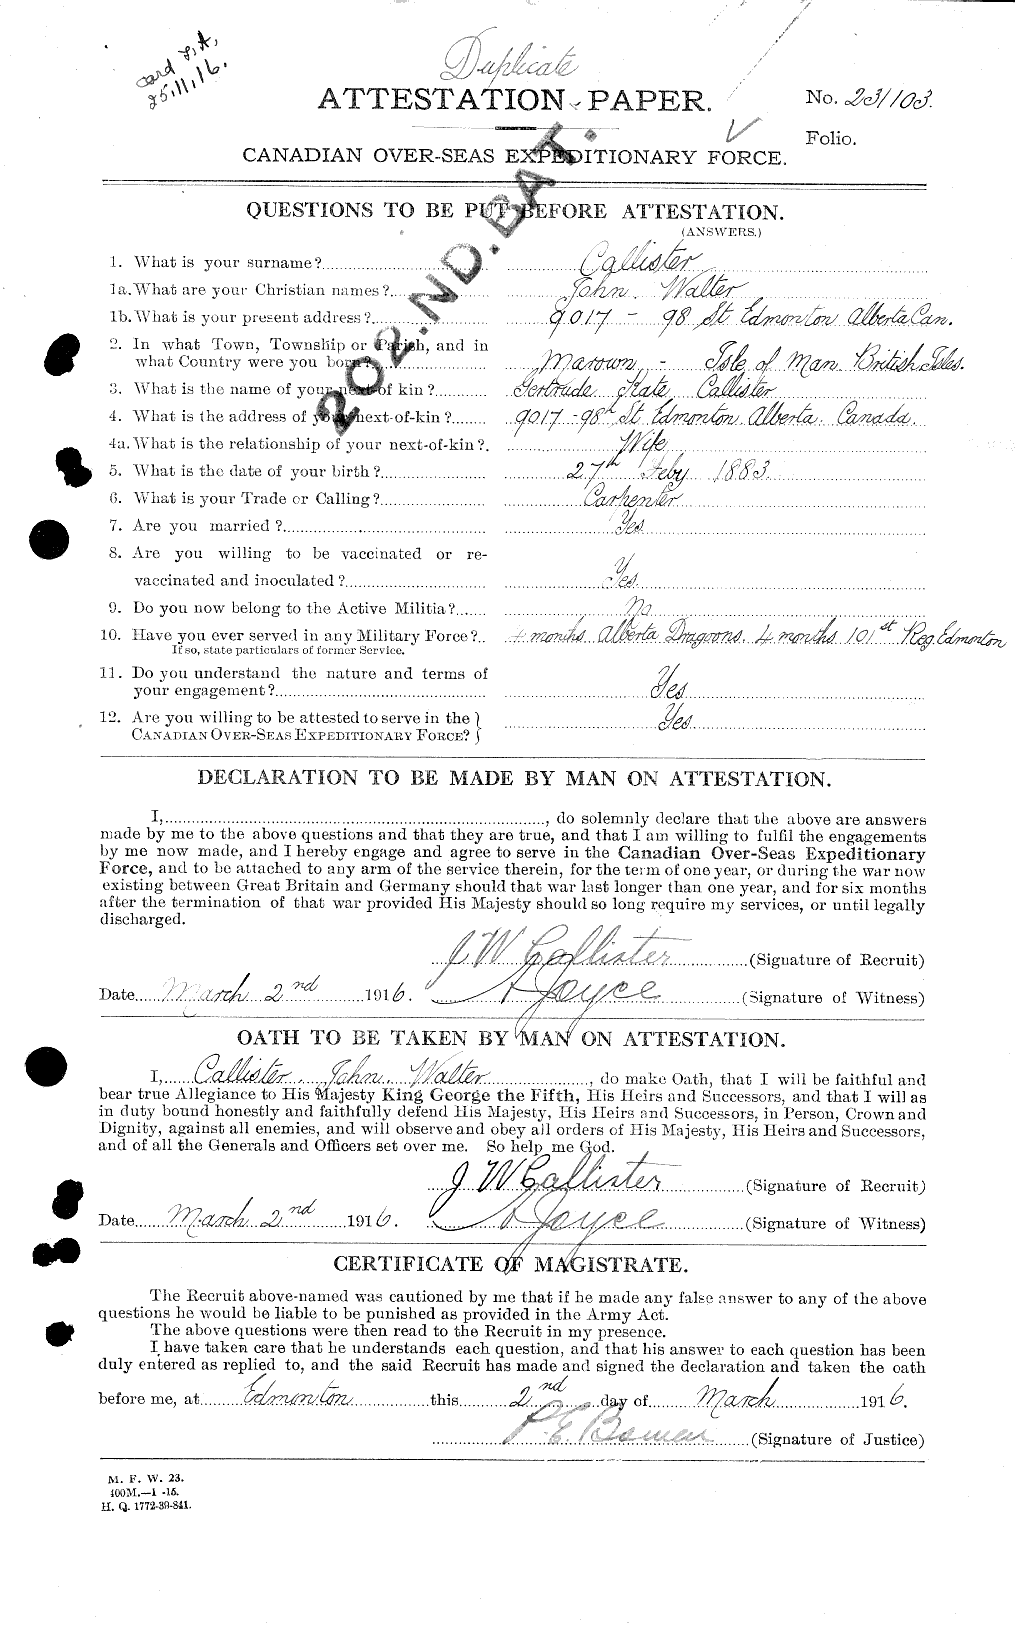 Personnel Records of the First World War - CEF 001303a